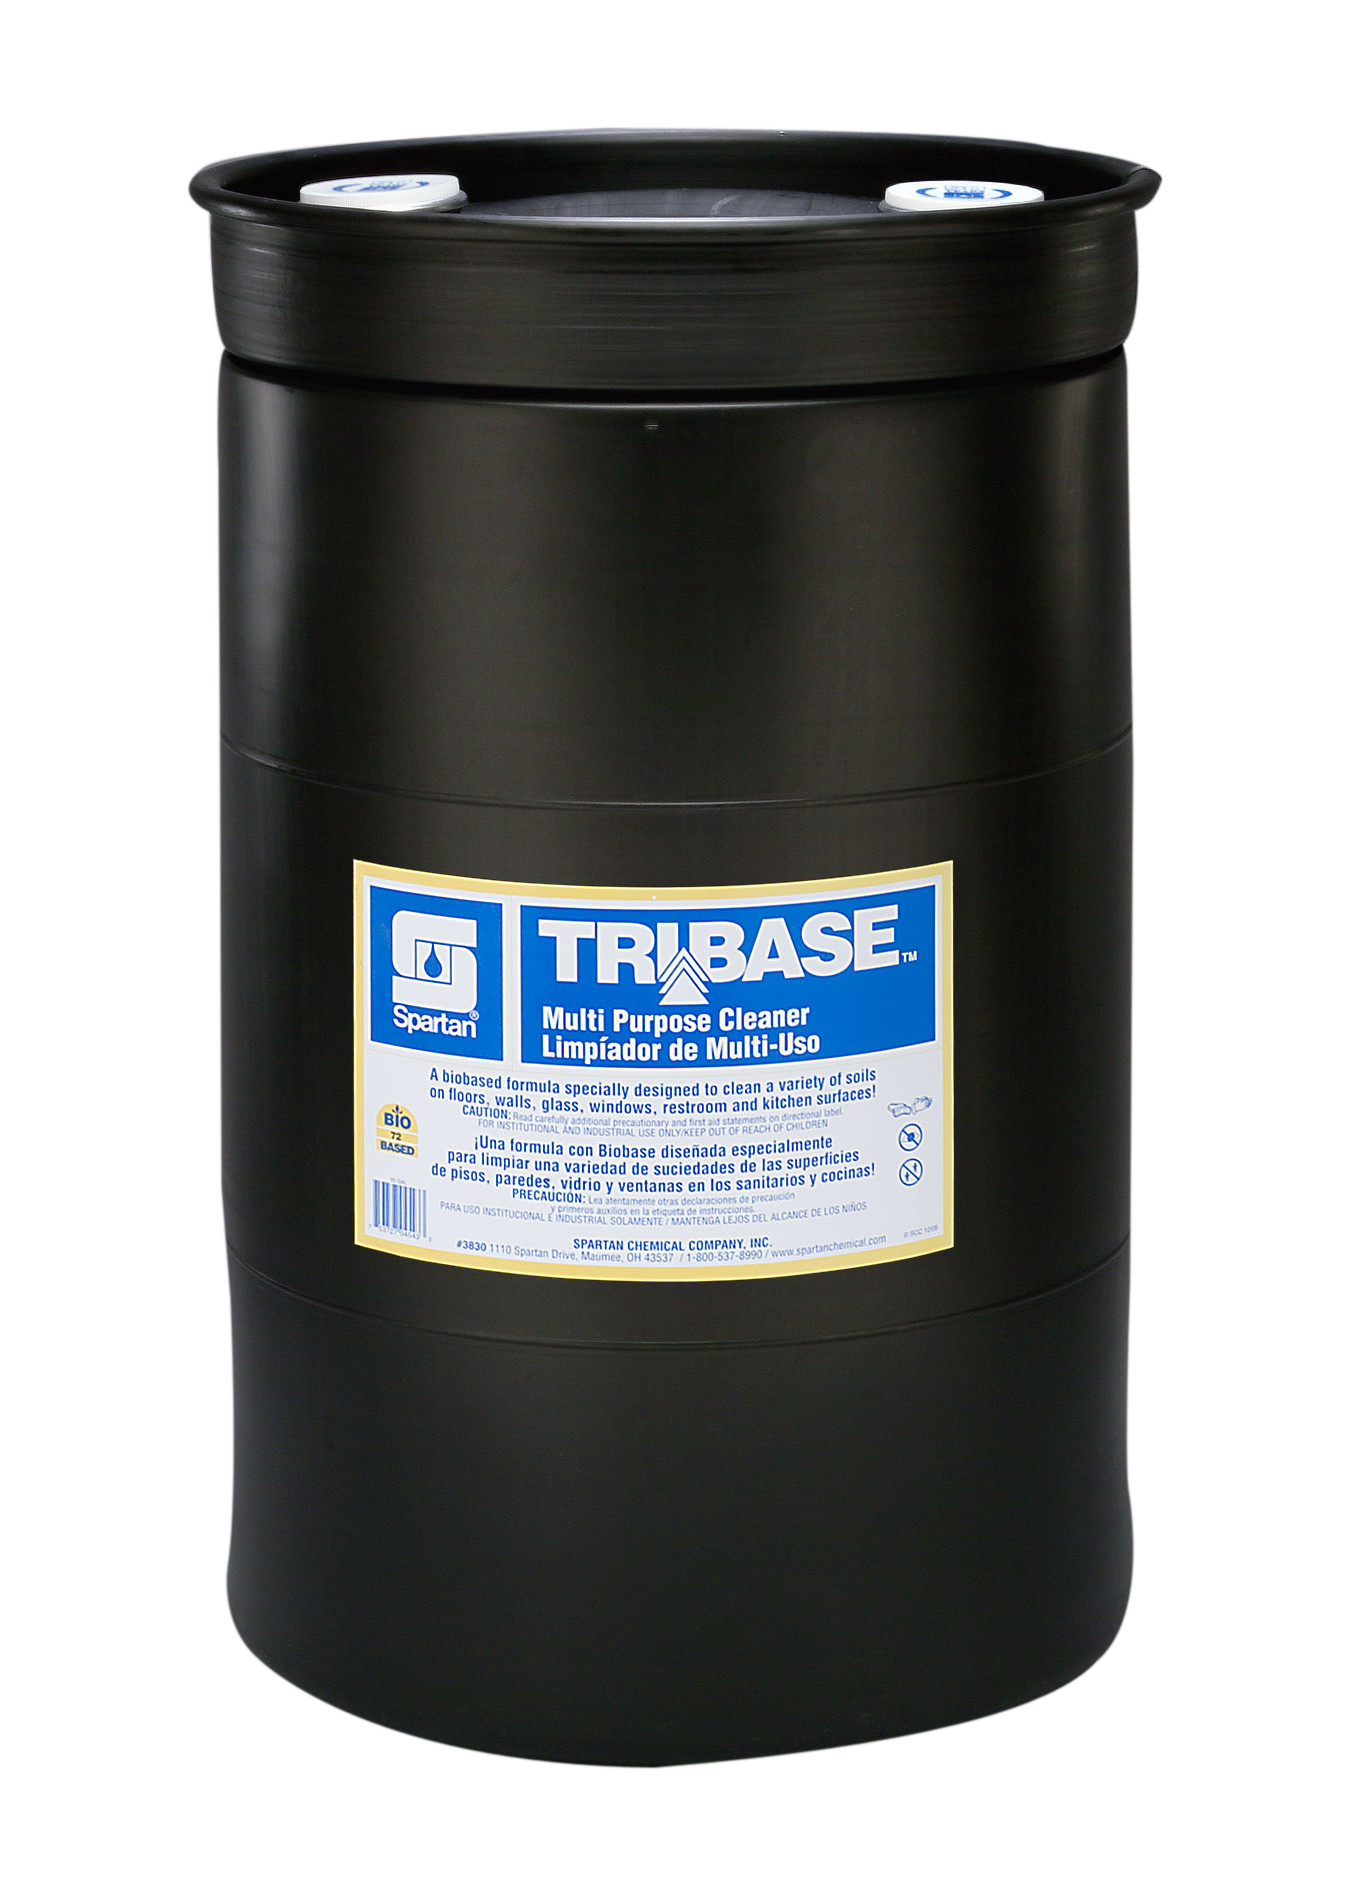 Spartan Chemical Company TriBase Multi Purpose Cleaner, 30 GAL DRUM